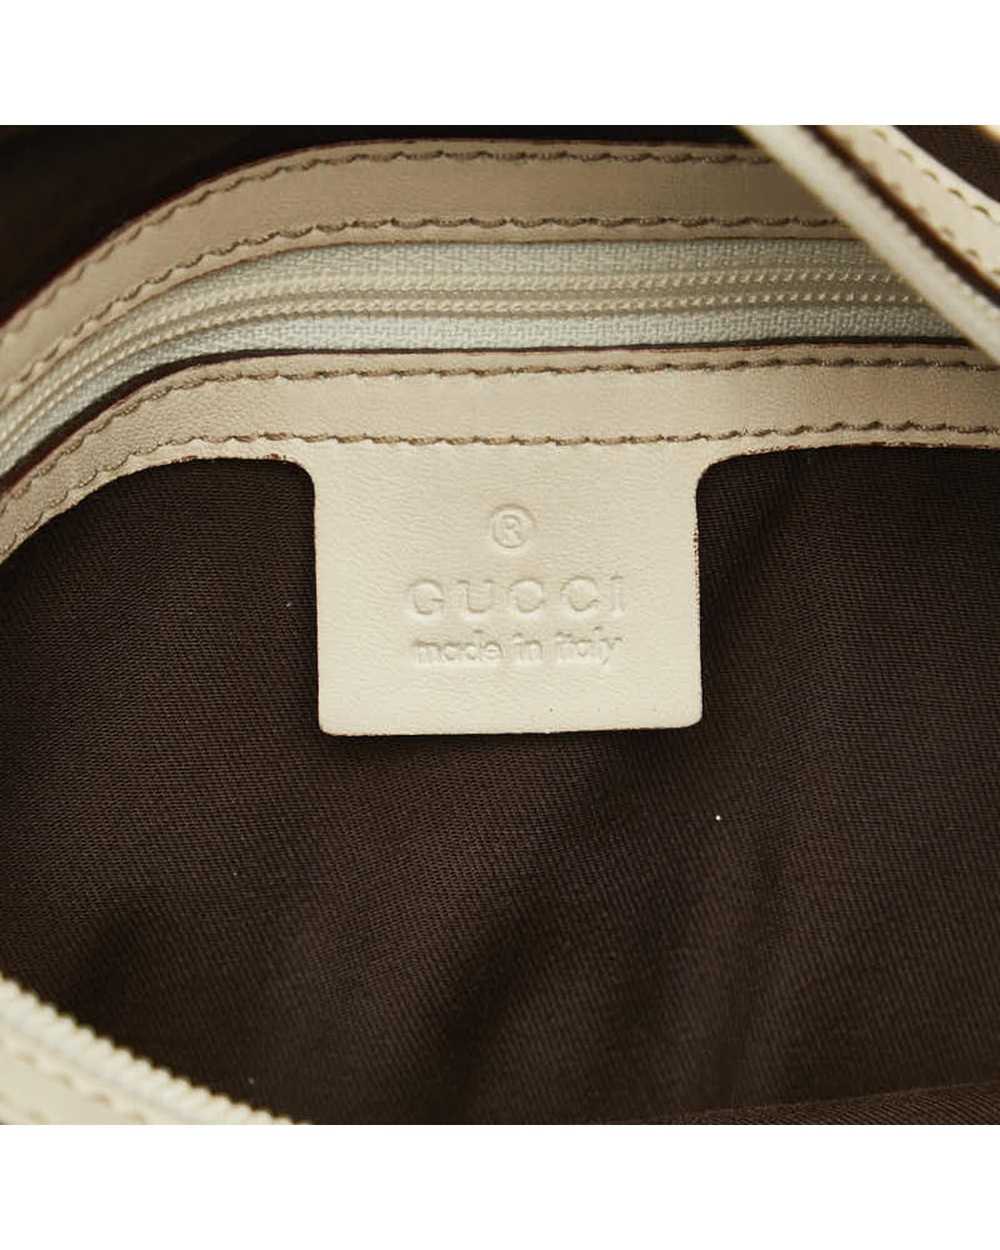 Gucci Canvas Tote Bag in Brown with Signature GG … - image 8